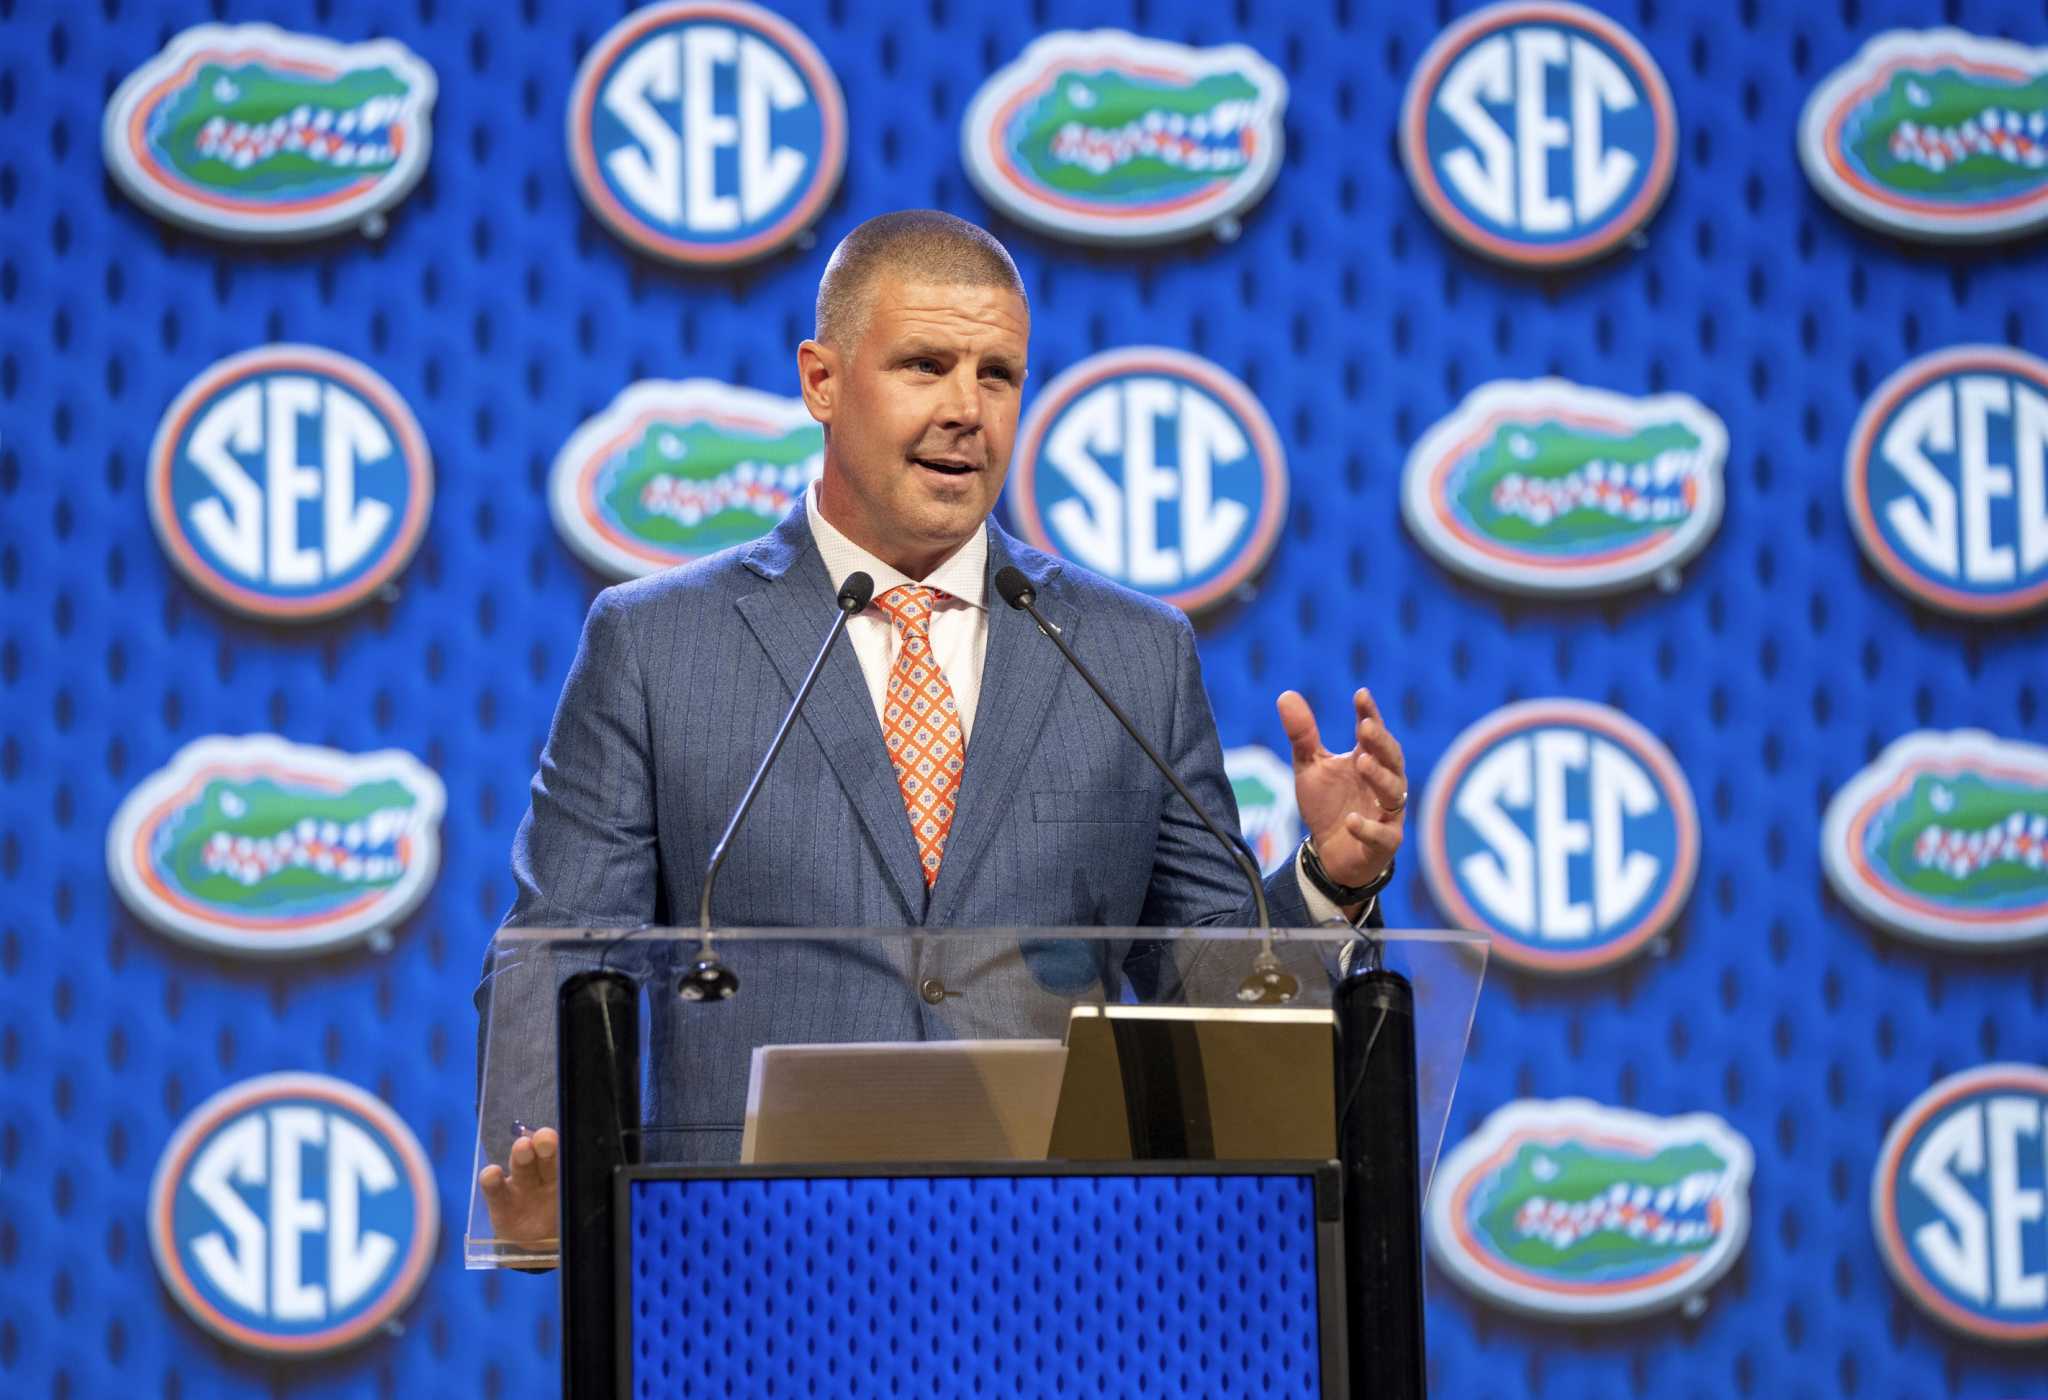 Florida coach Billy Napier and two co-defendants ask court to dismiss Jaden Rashada lawsuit